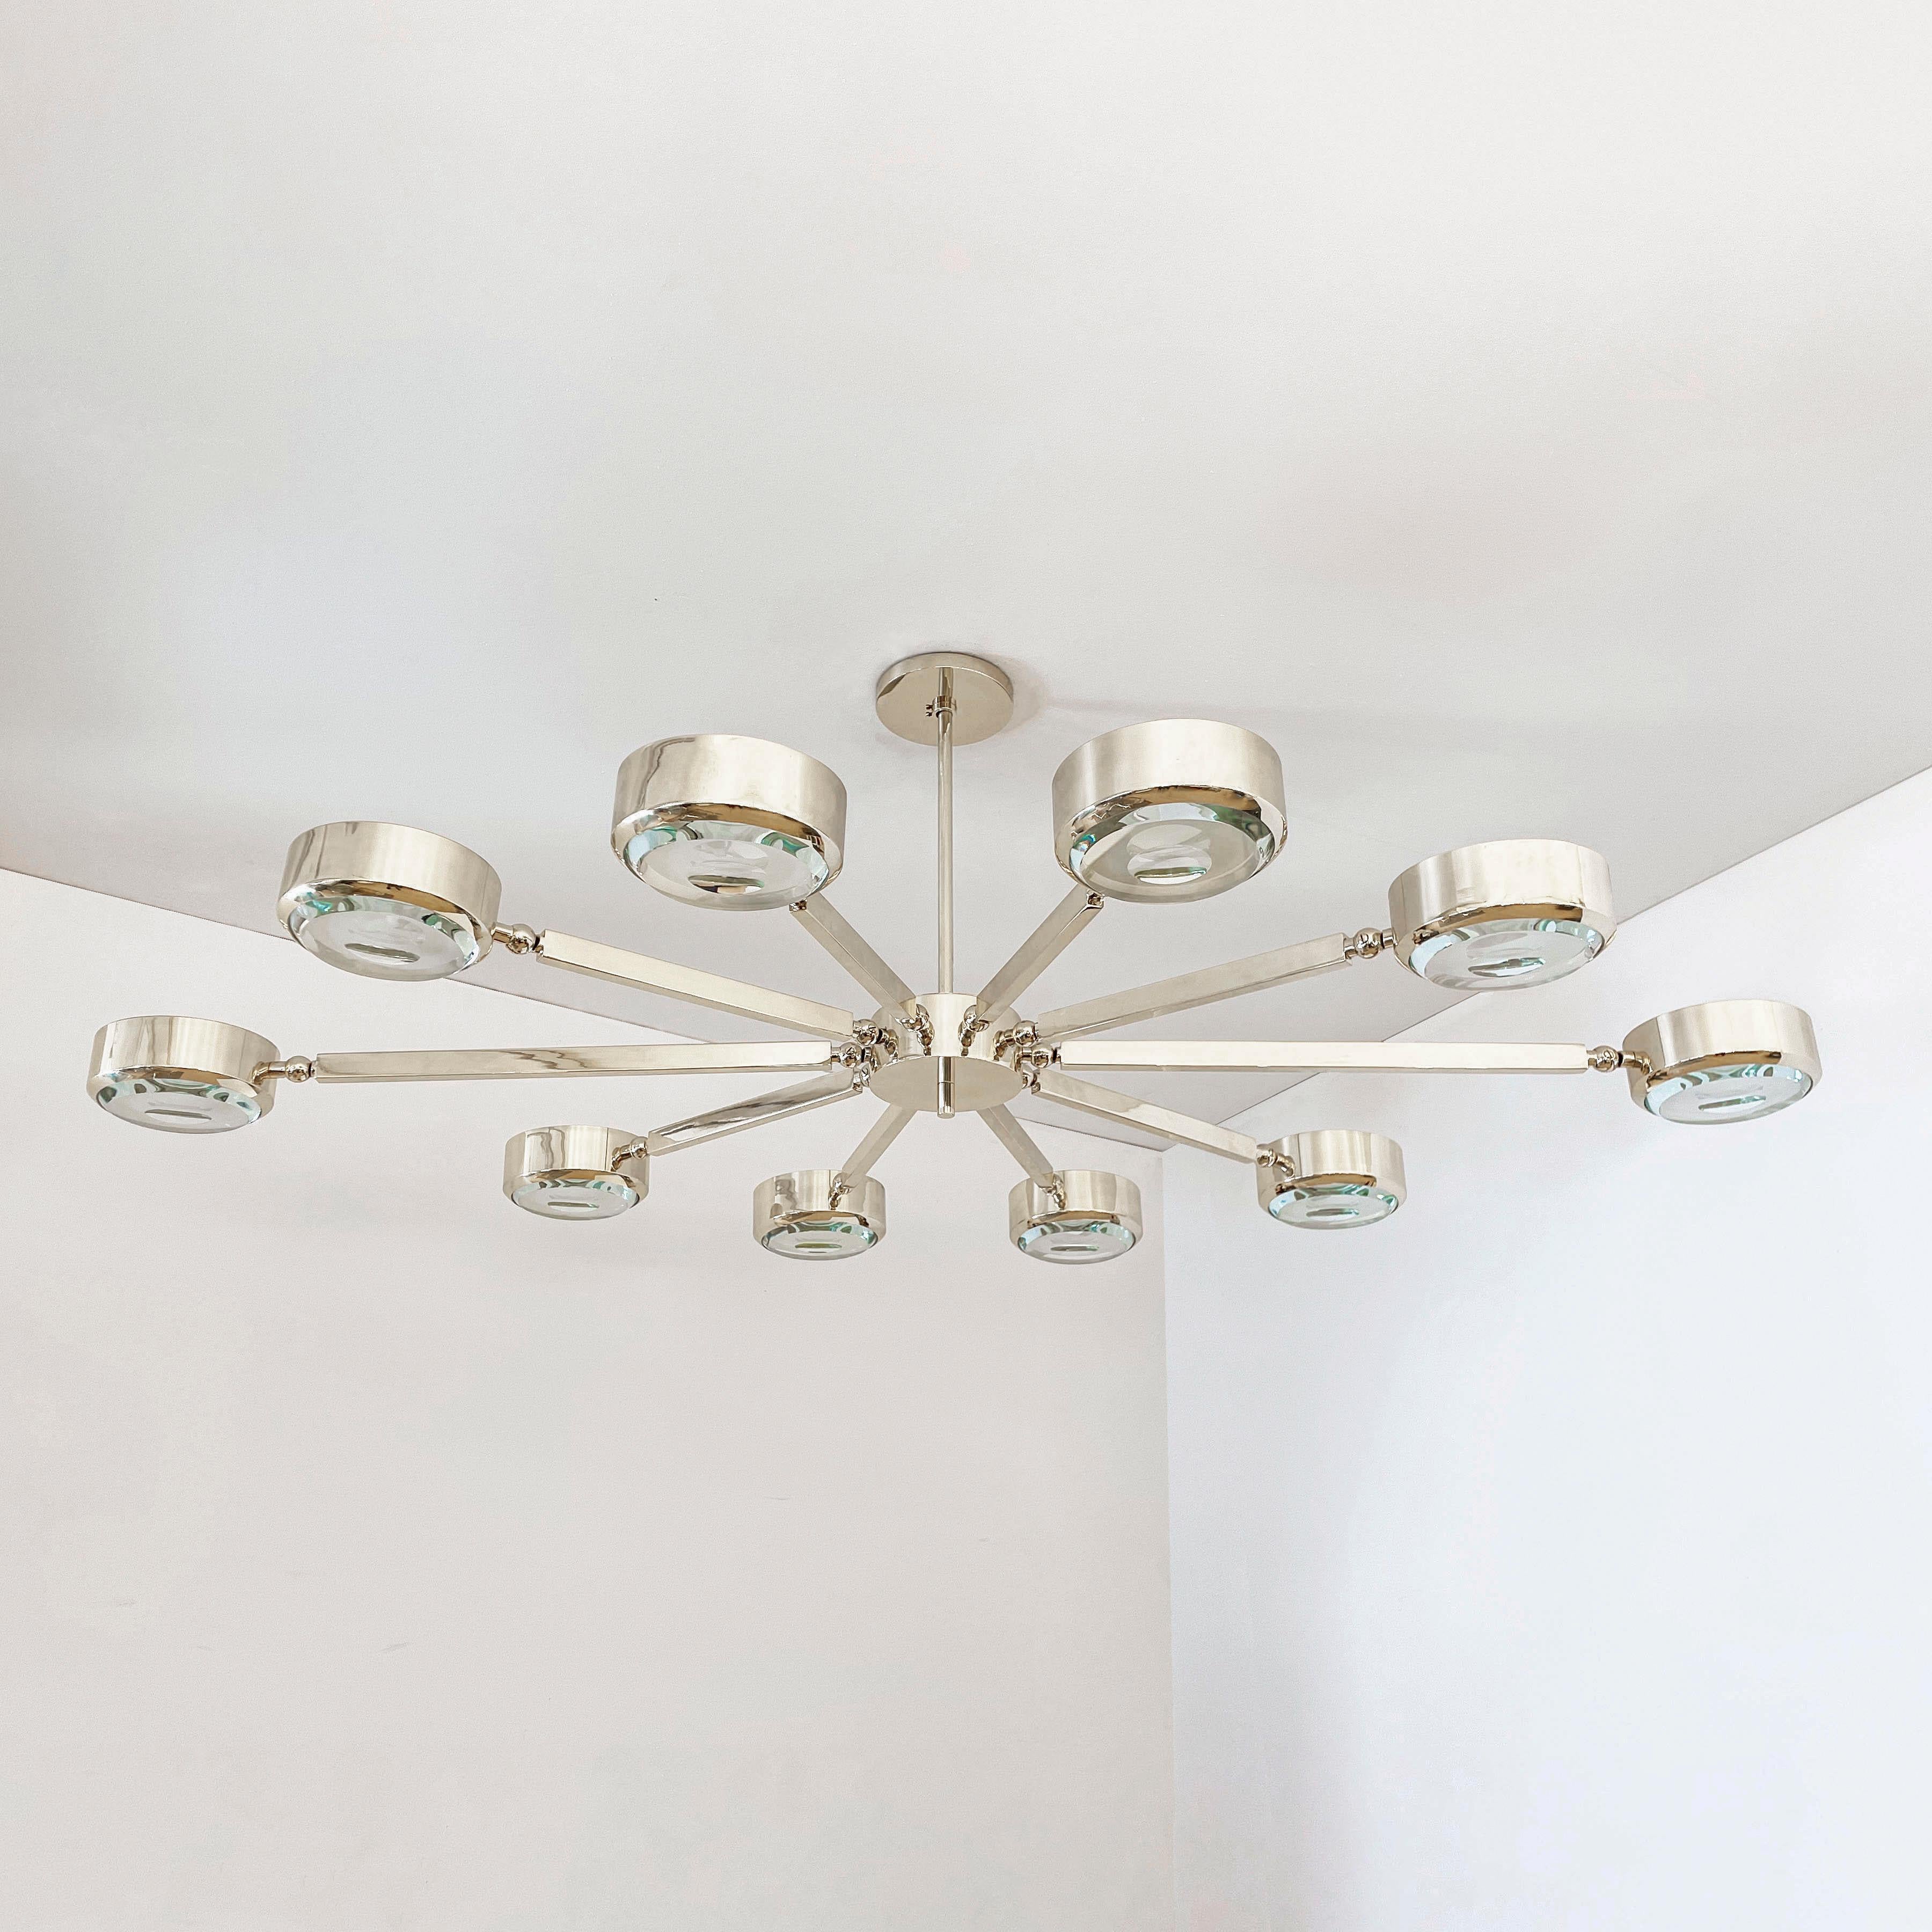 The Oculus ceiling light features an innovative articulating design that allows the ten arms to have a wide range of motion for endless configurations. The brass constructed frame can be flush mounted or installed on a stem and can be fitted with